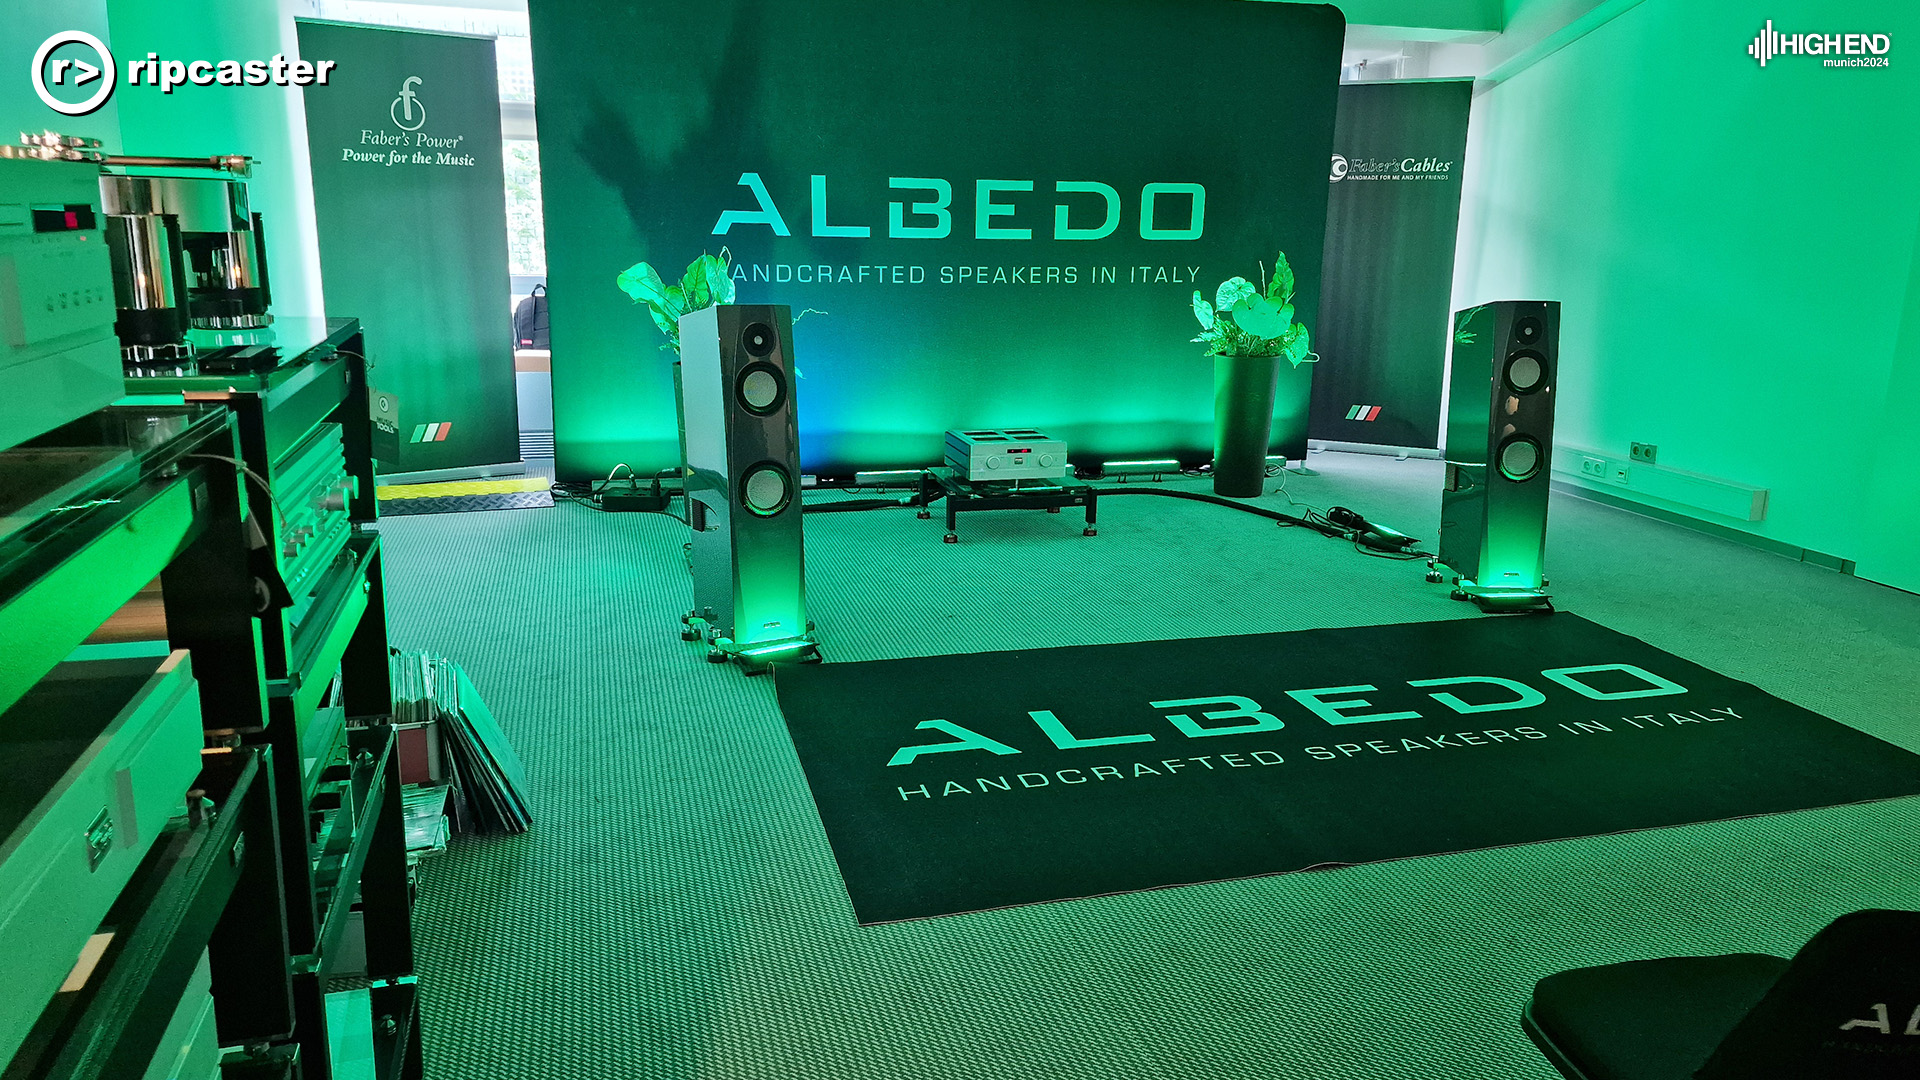 Albedo.  A pair of floorstanding speakers with other HiFi equipment between them and to the side in the foreground.